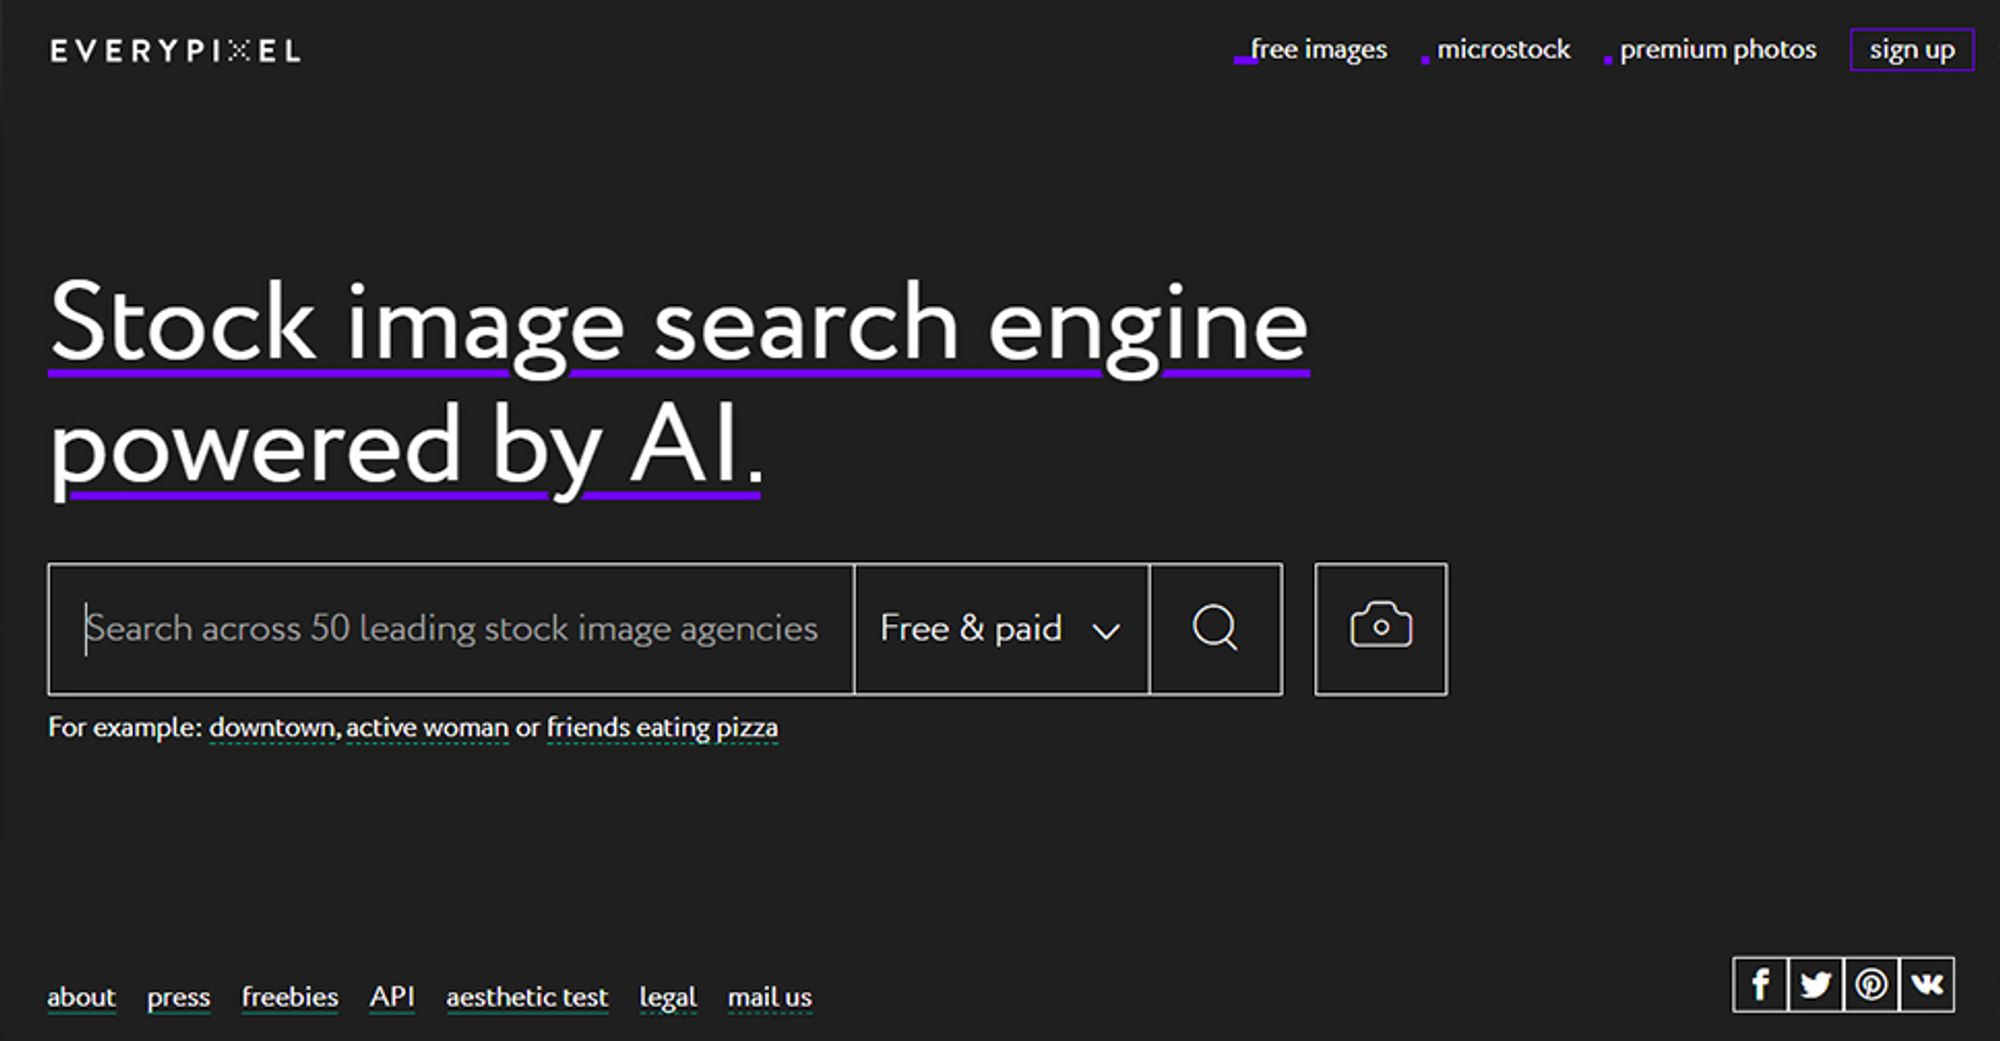 Stock Image Search Engine - More Than 50 Best Sources | Everypixel